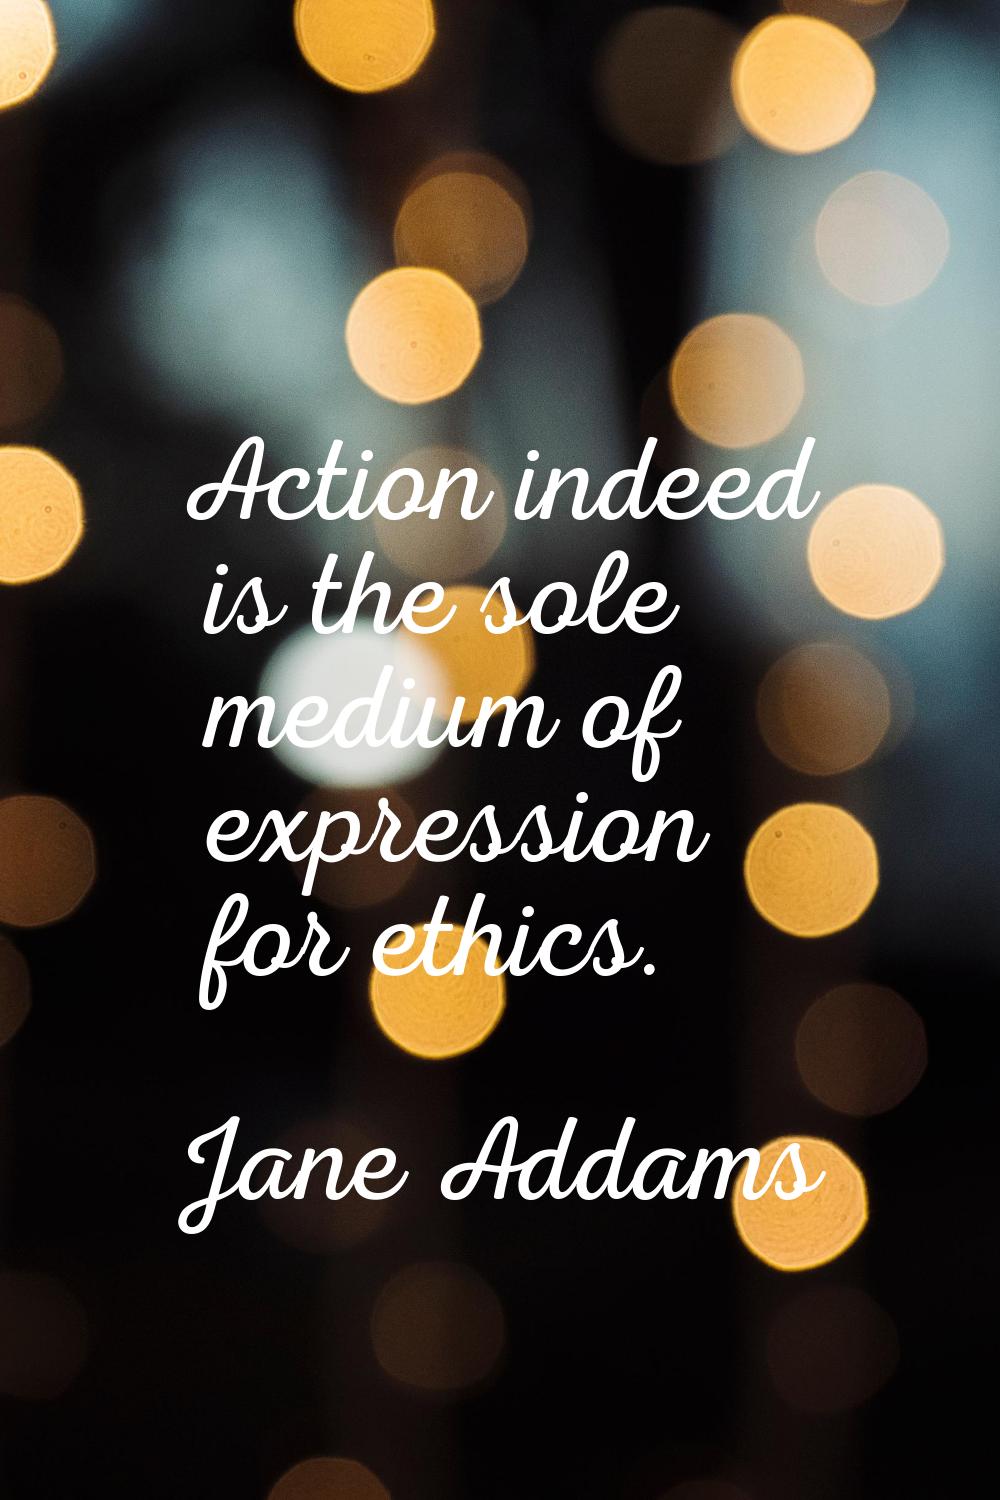 Action indeed is the sole medium of expression for ethics.